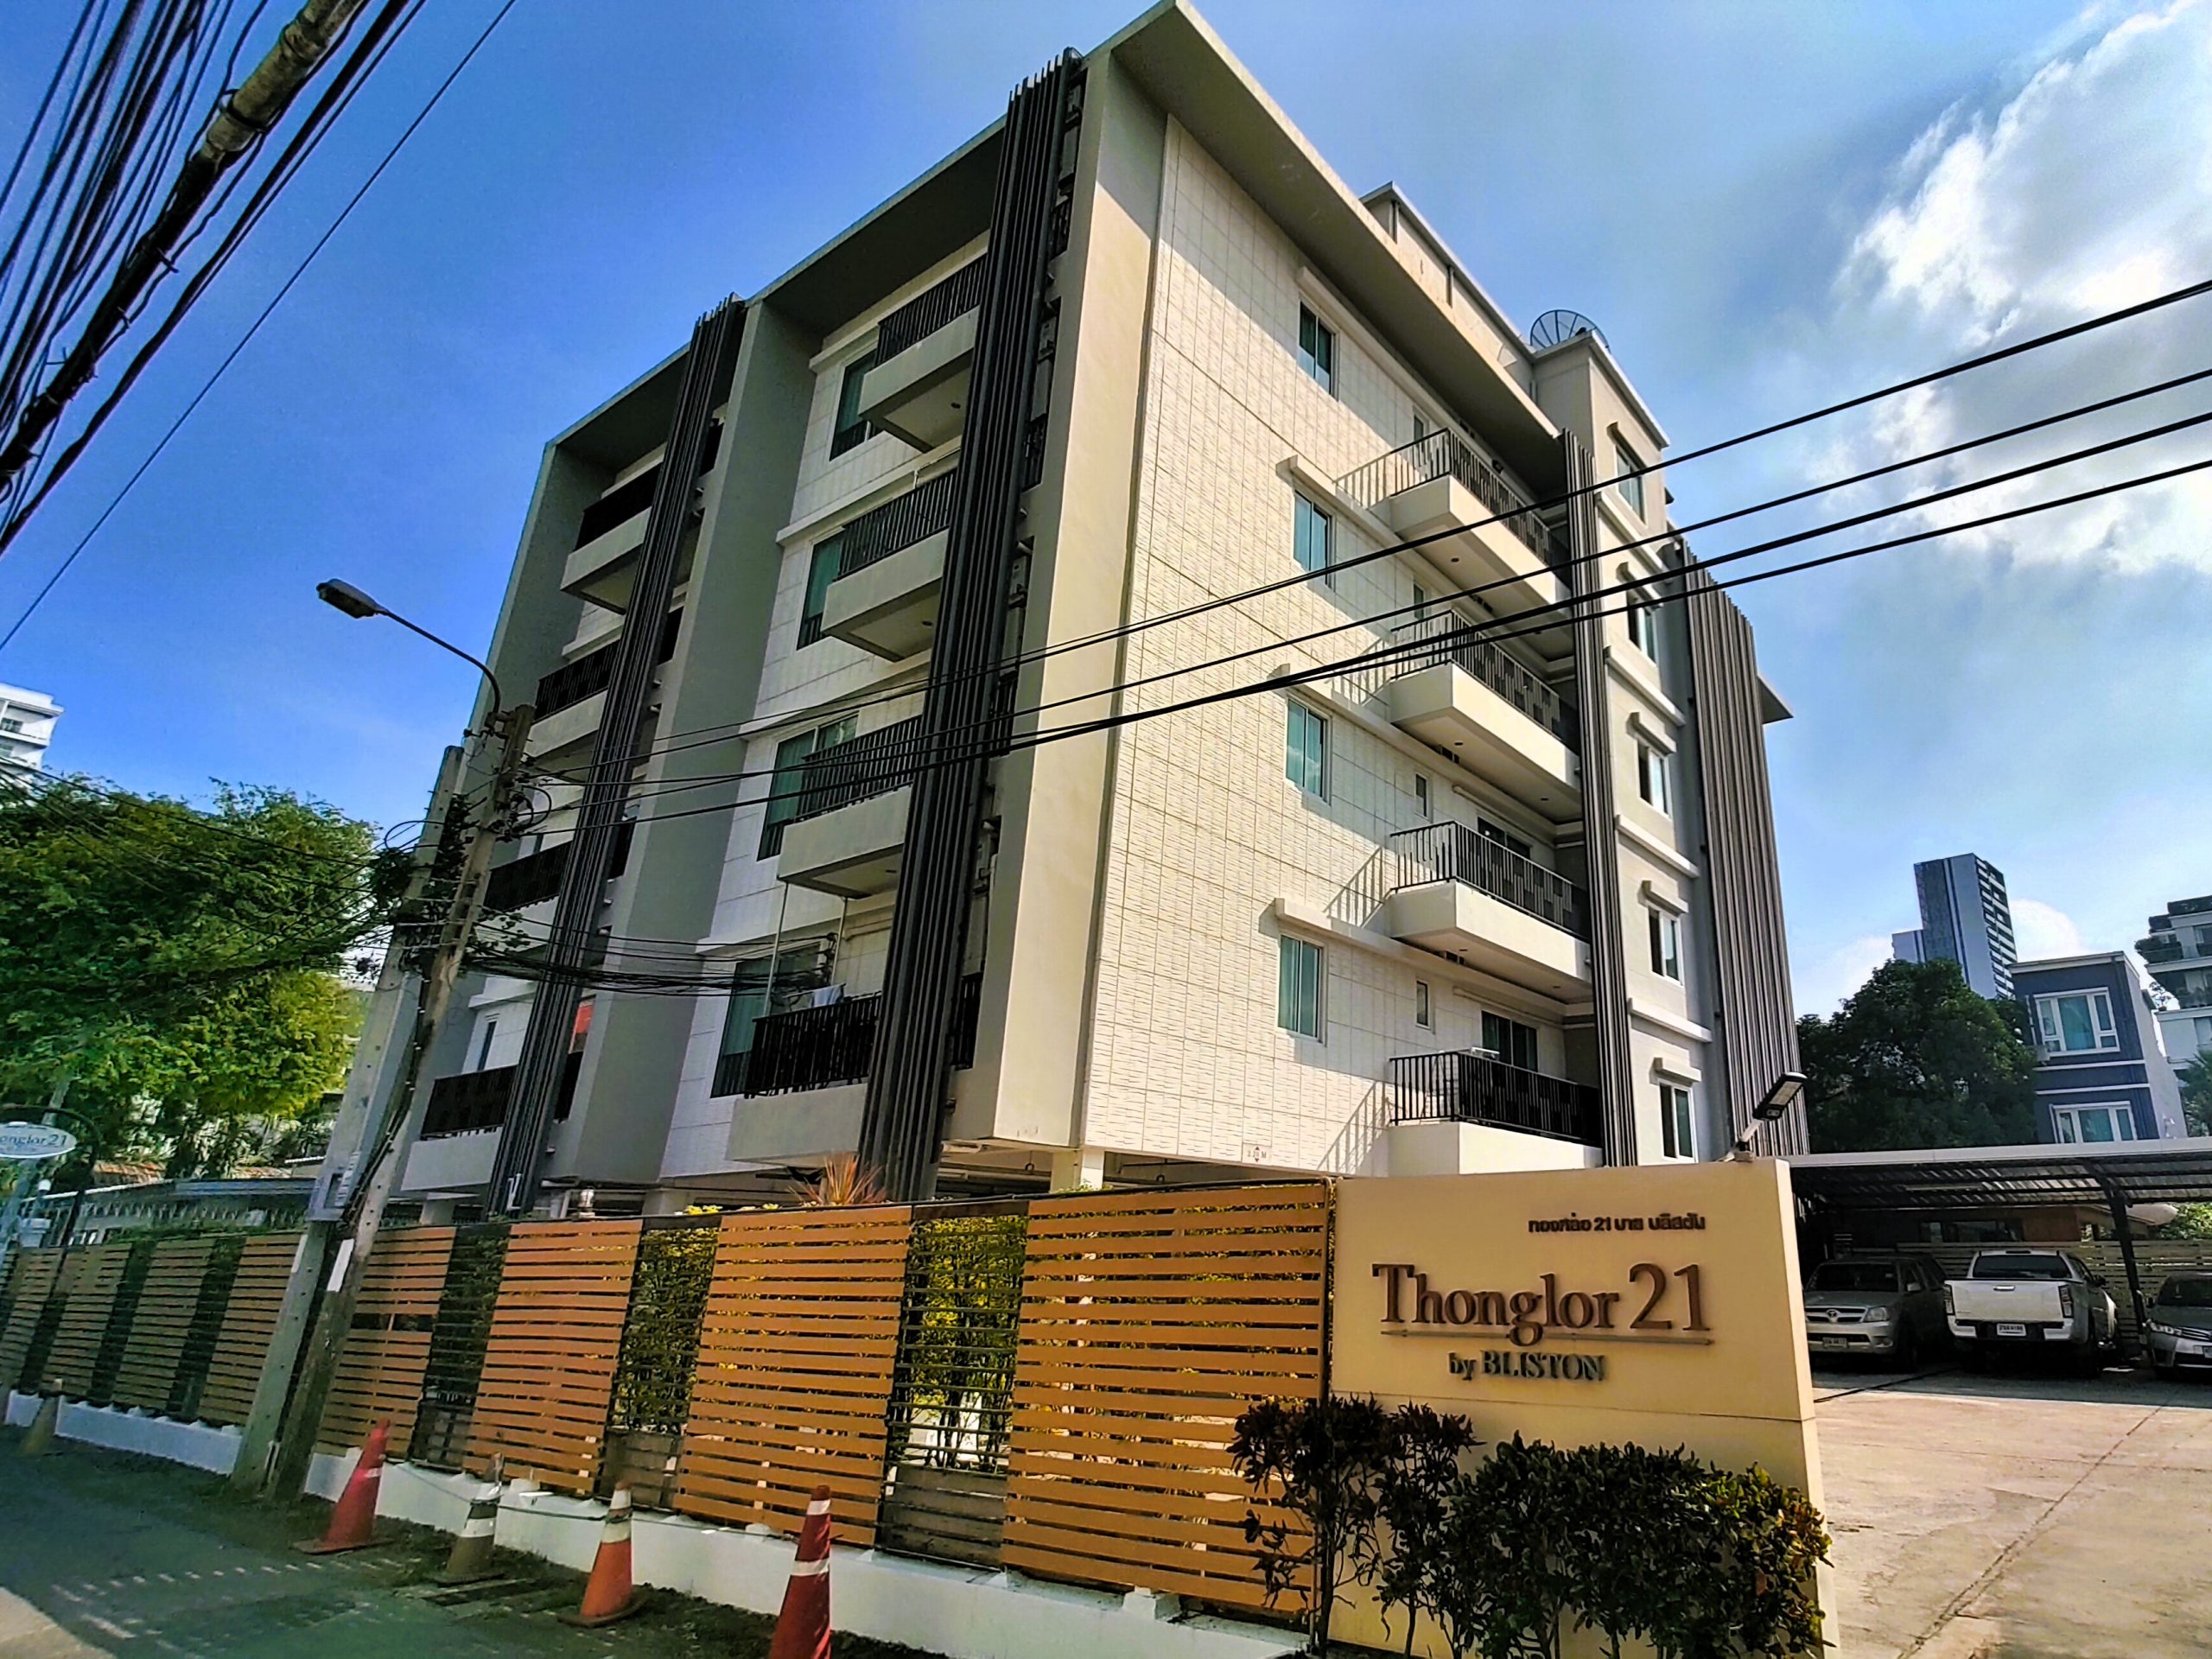 Thonglor 21 By Bliston